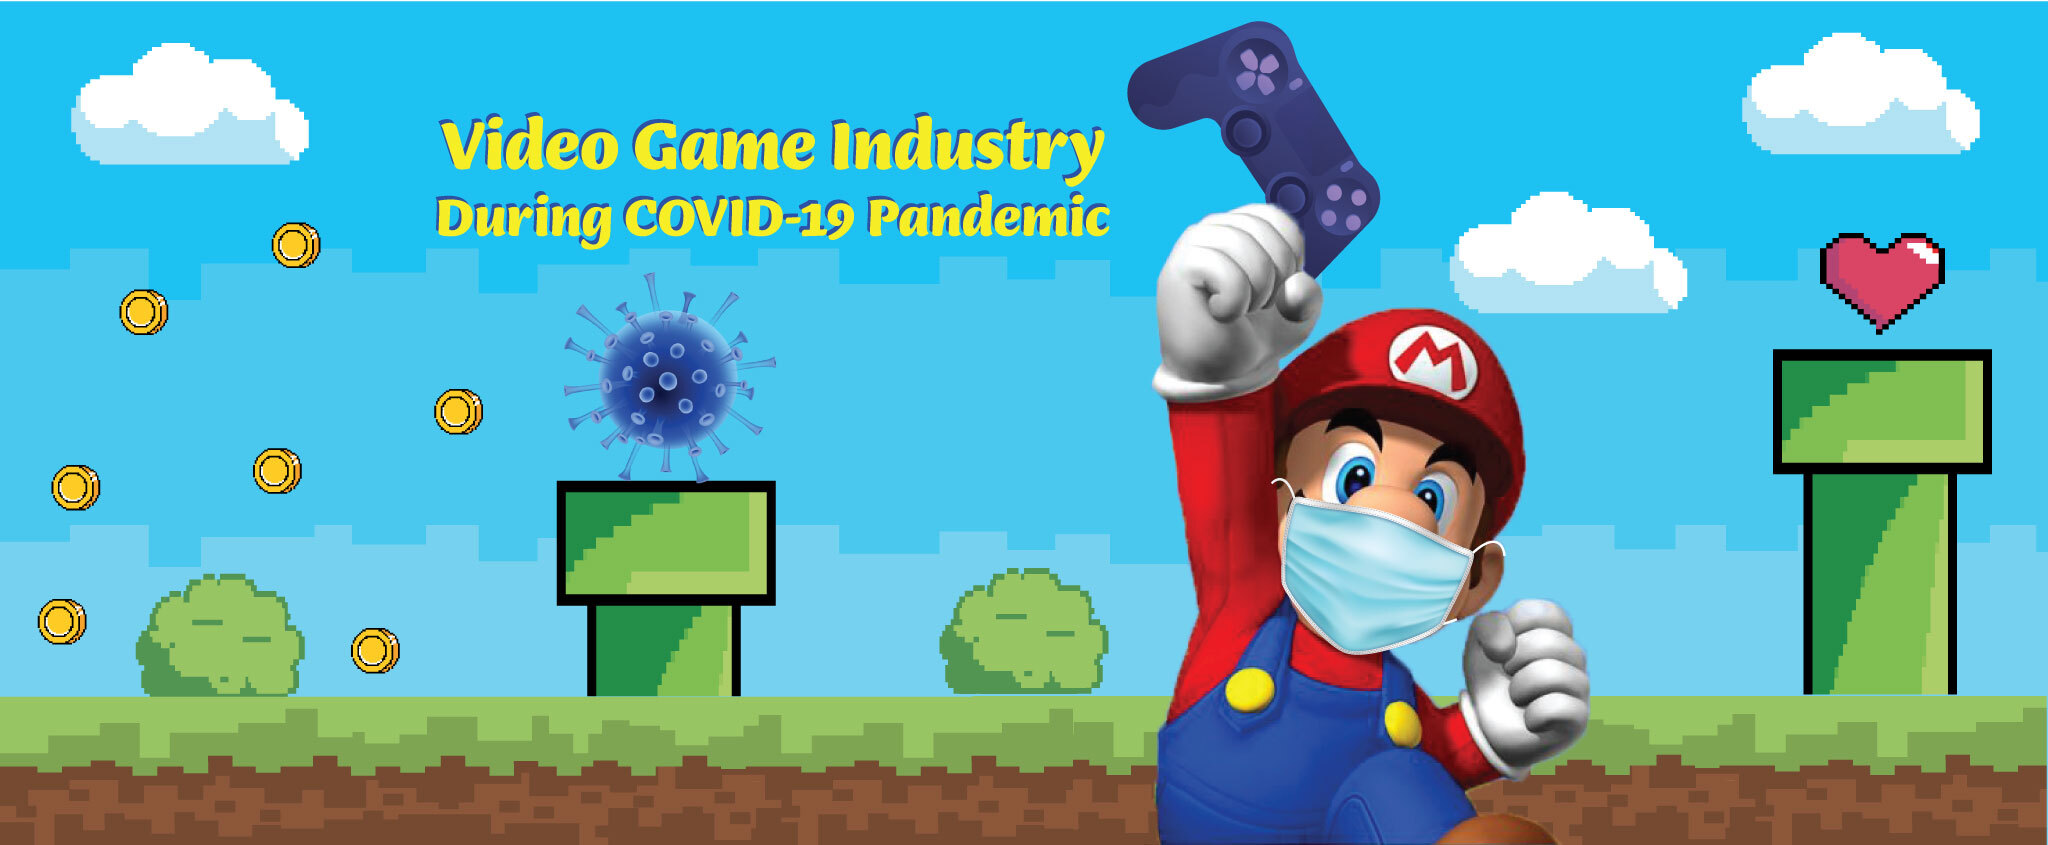 Video Game Industry During COVID-19 Pandemic